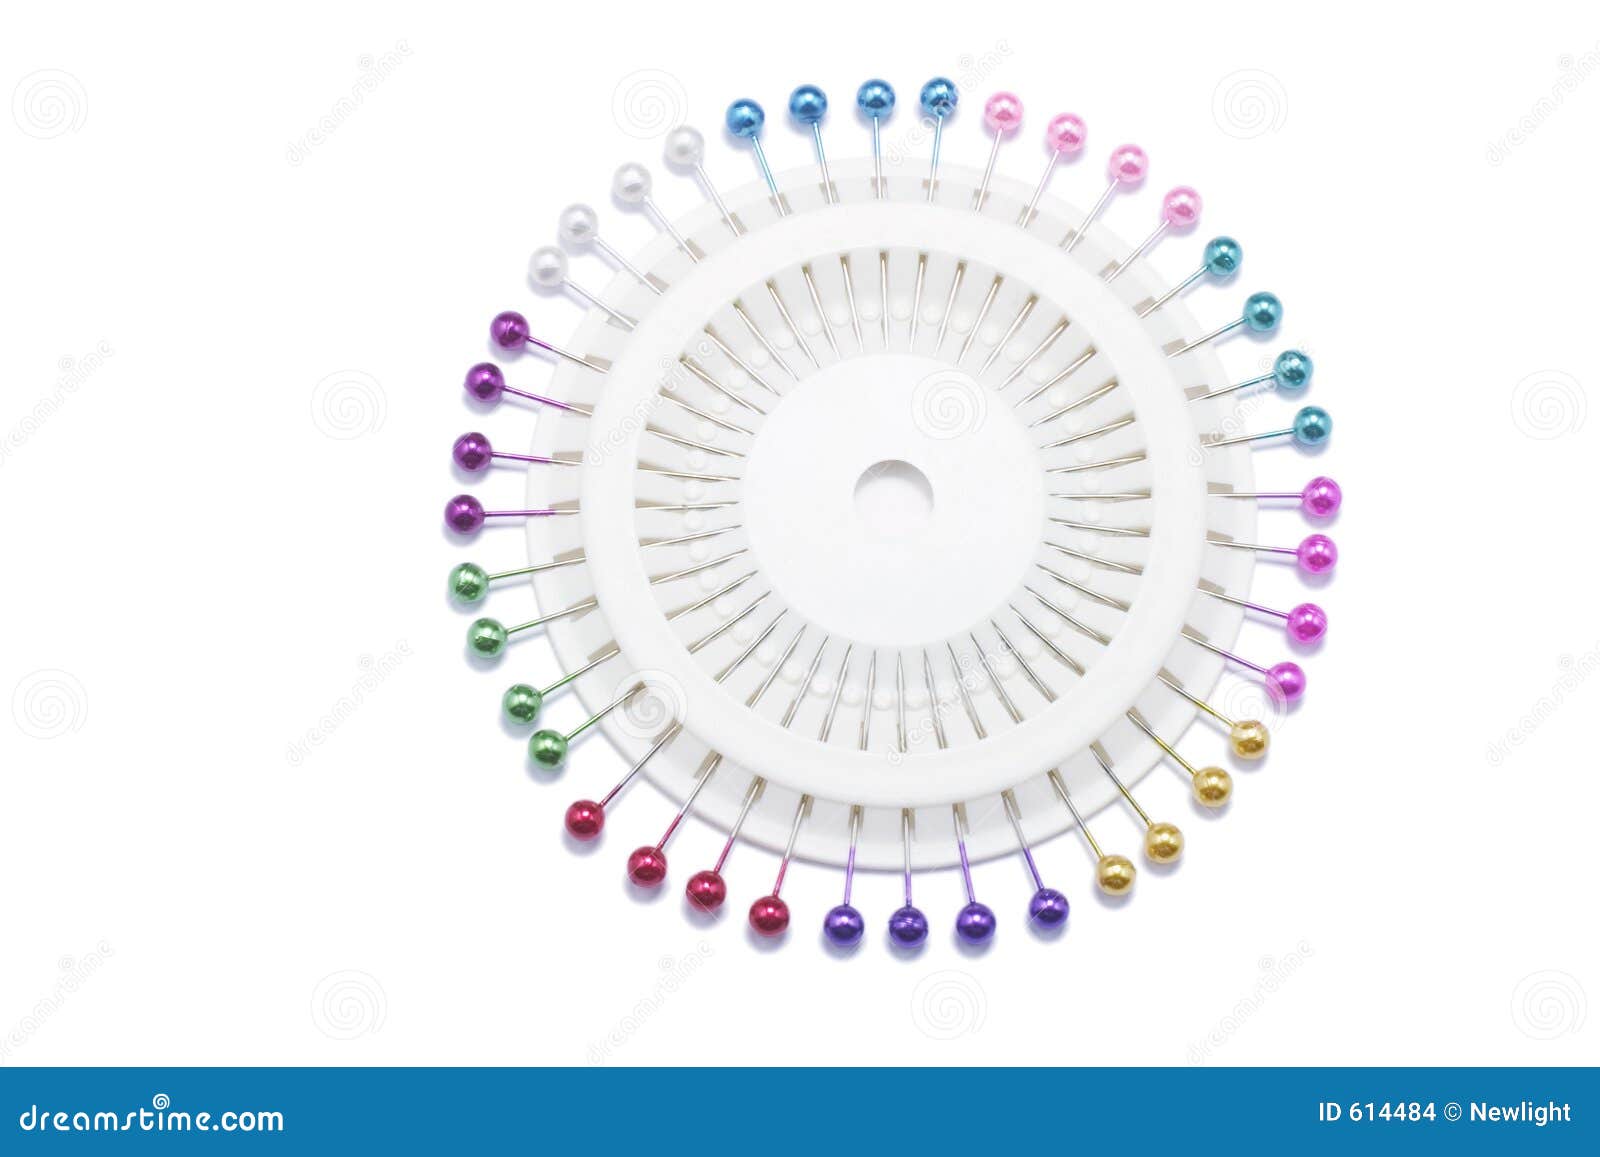 Wheel of Sewing Pins stock photo. Image of needles, craft - 614484